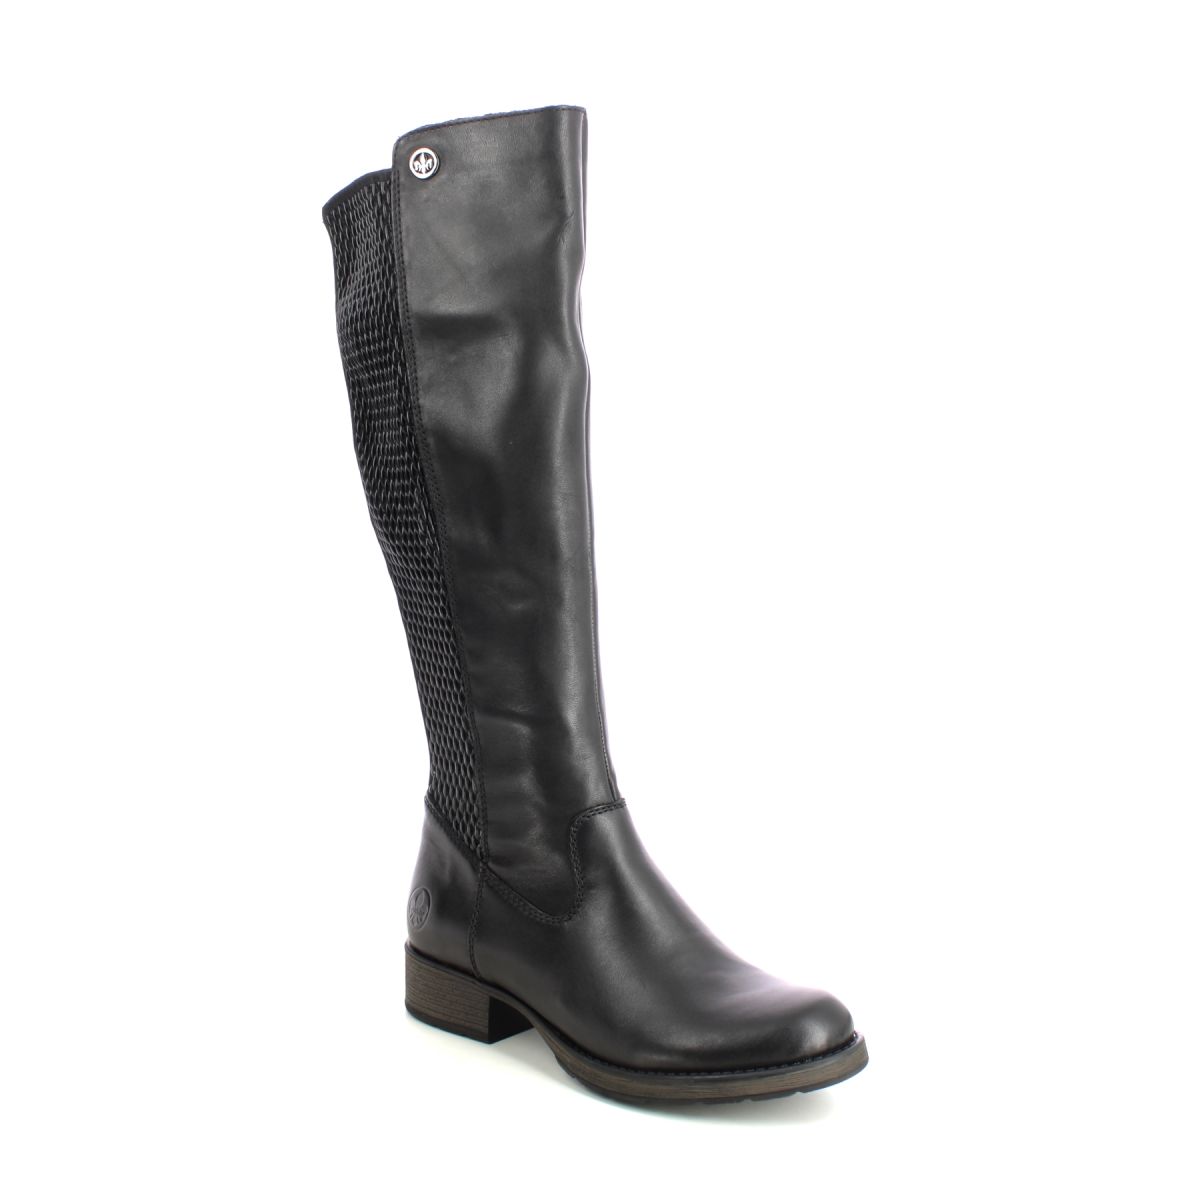 Rieker Indafit Stretch Black Leather Womens Knee-High Boots Z9591-00 In Size 37 In Plain Black Leather